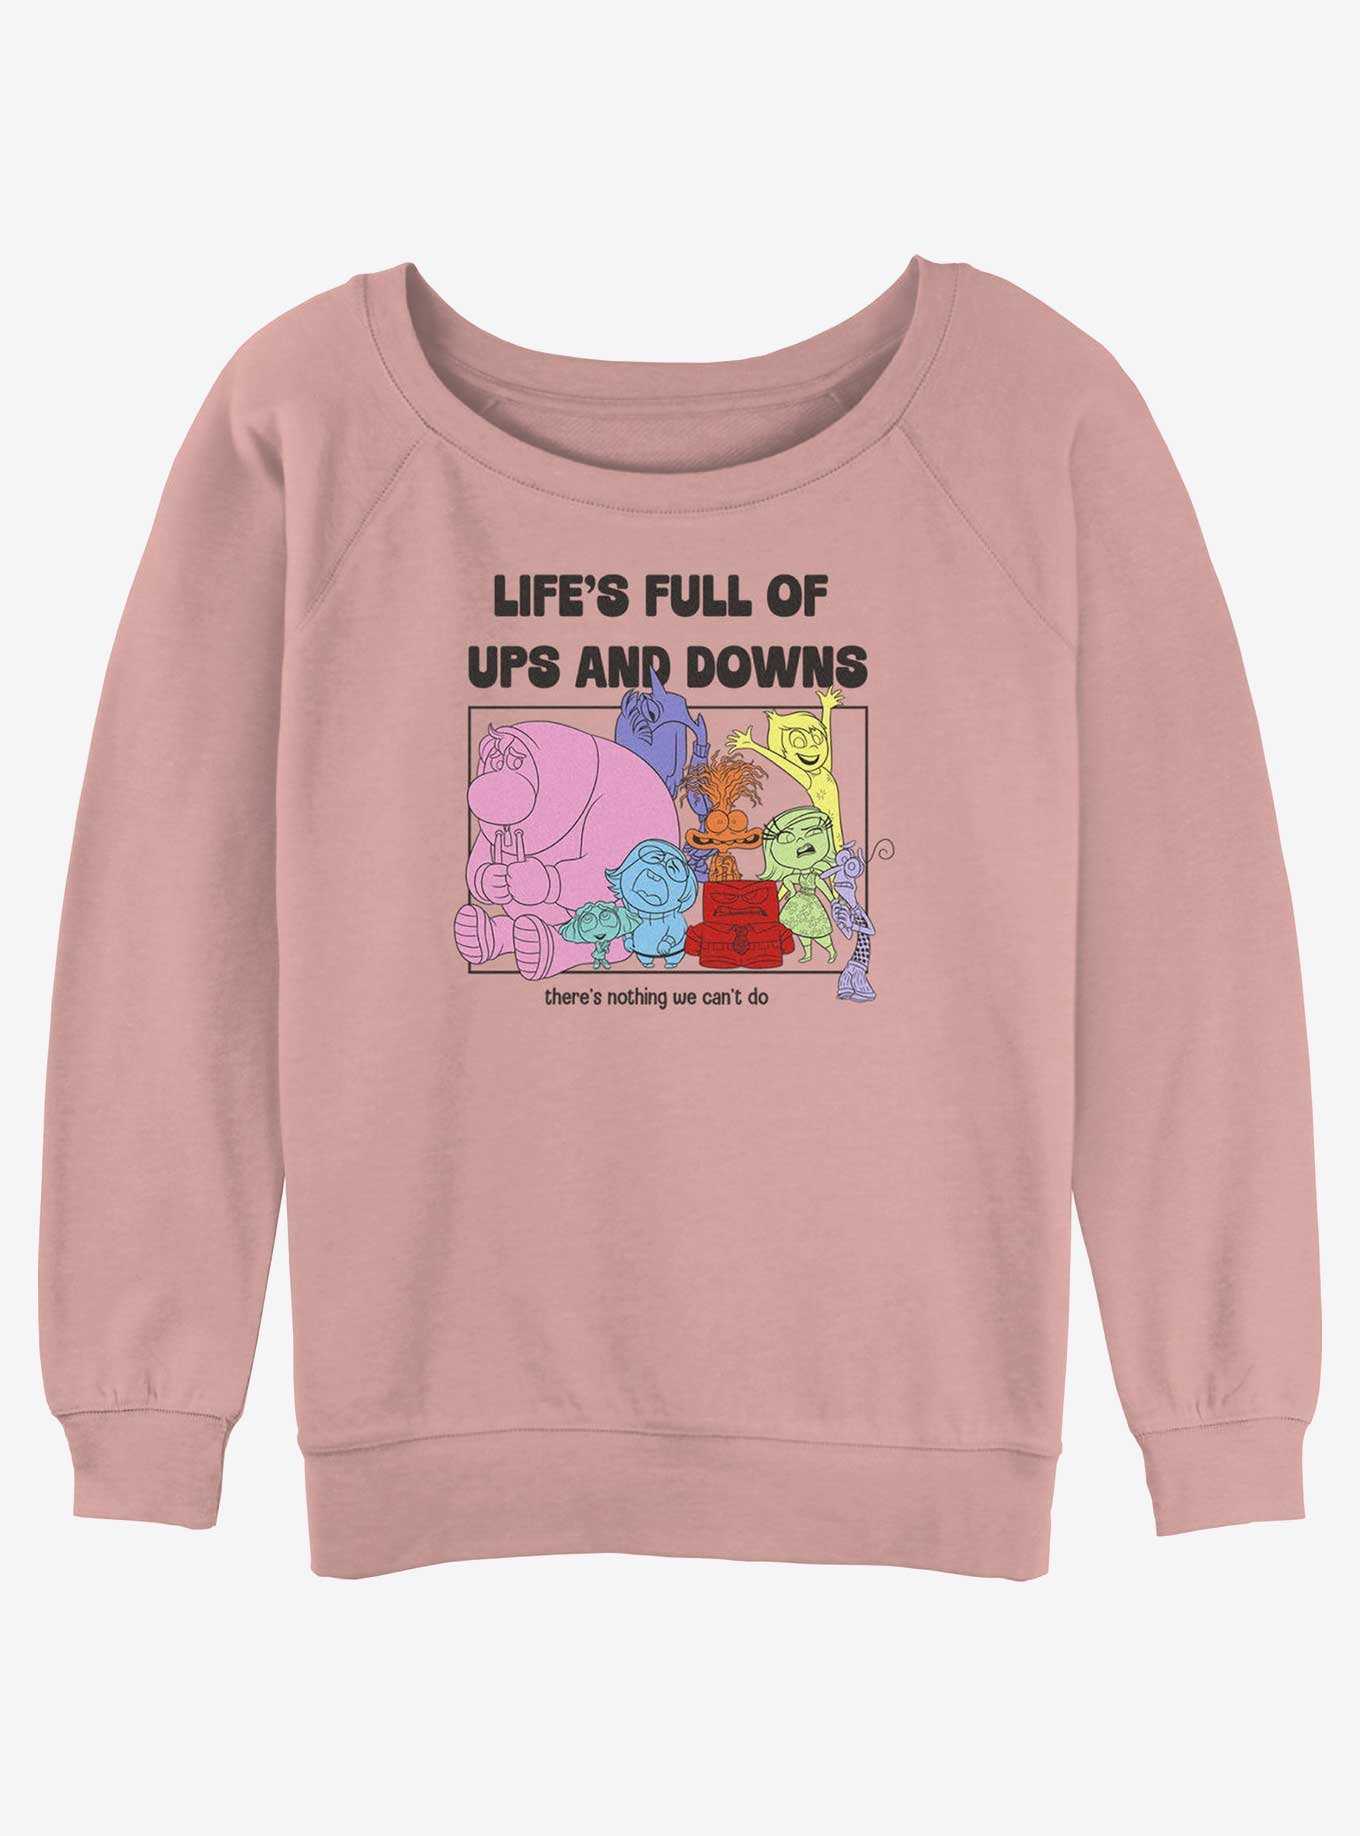 Disney Pixar Inside Out 2 Life's Full Of Ups And Downs Womens Slouchy Sweatshirt, , hi-res